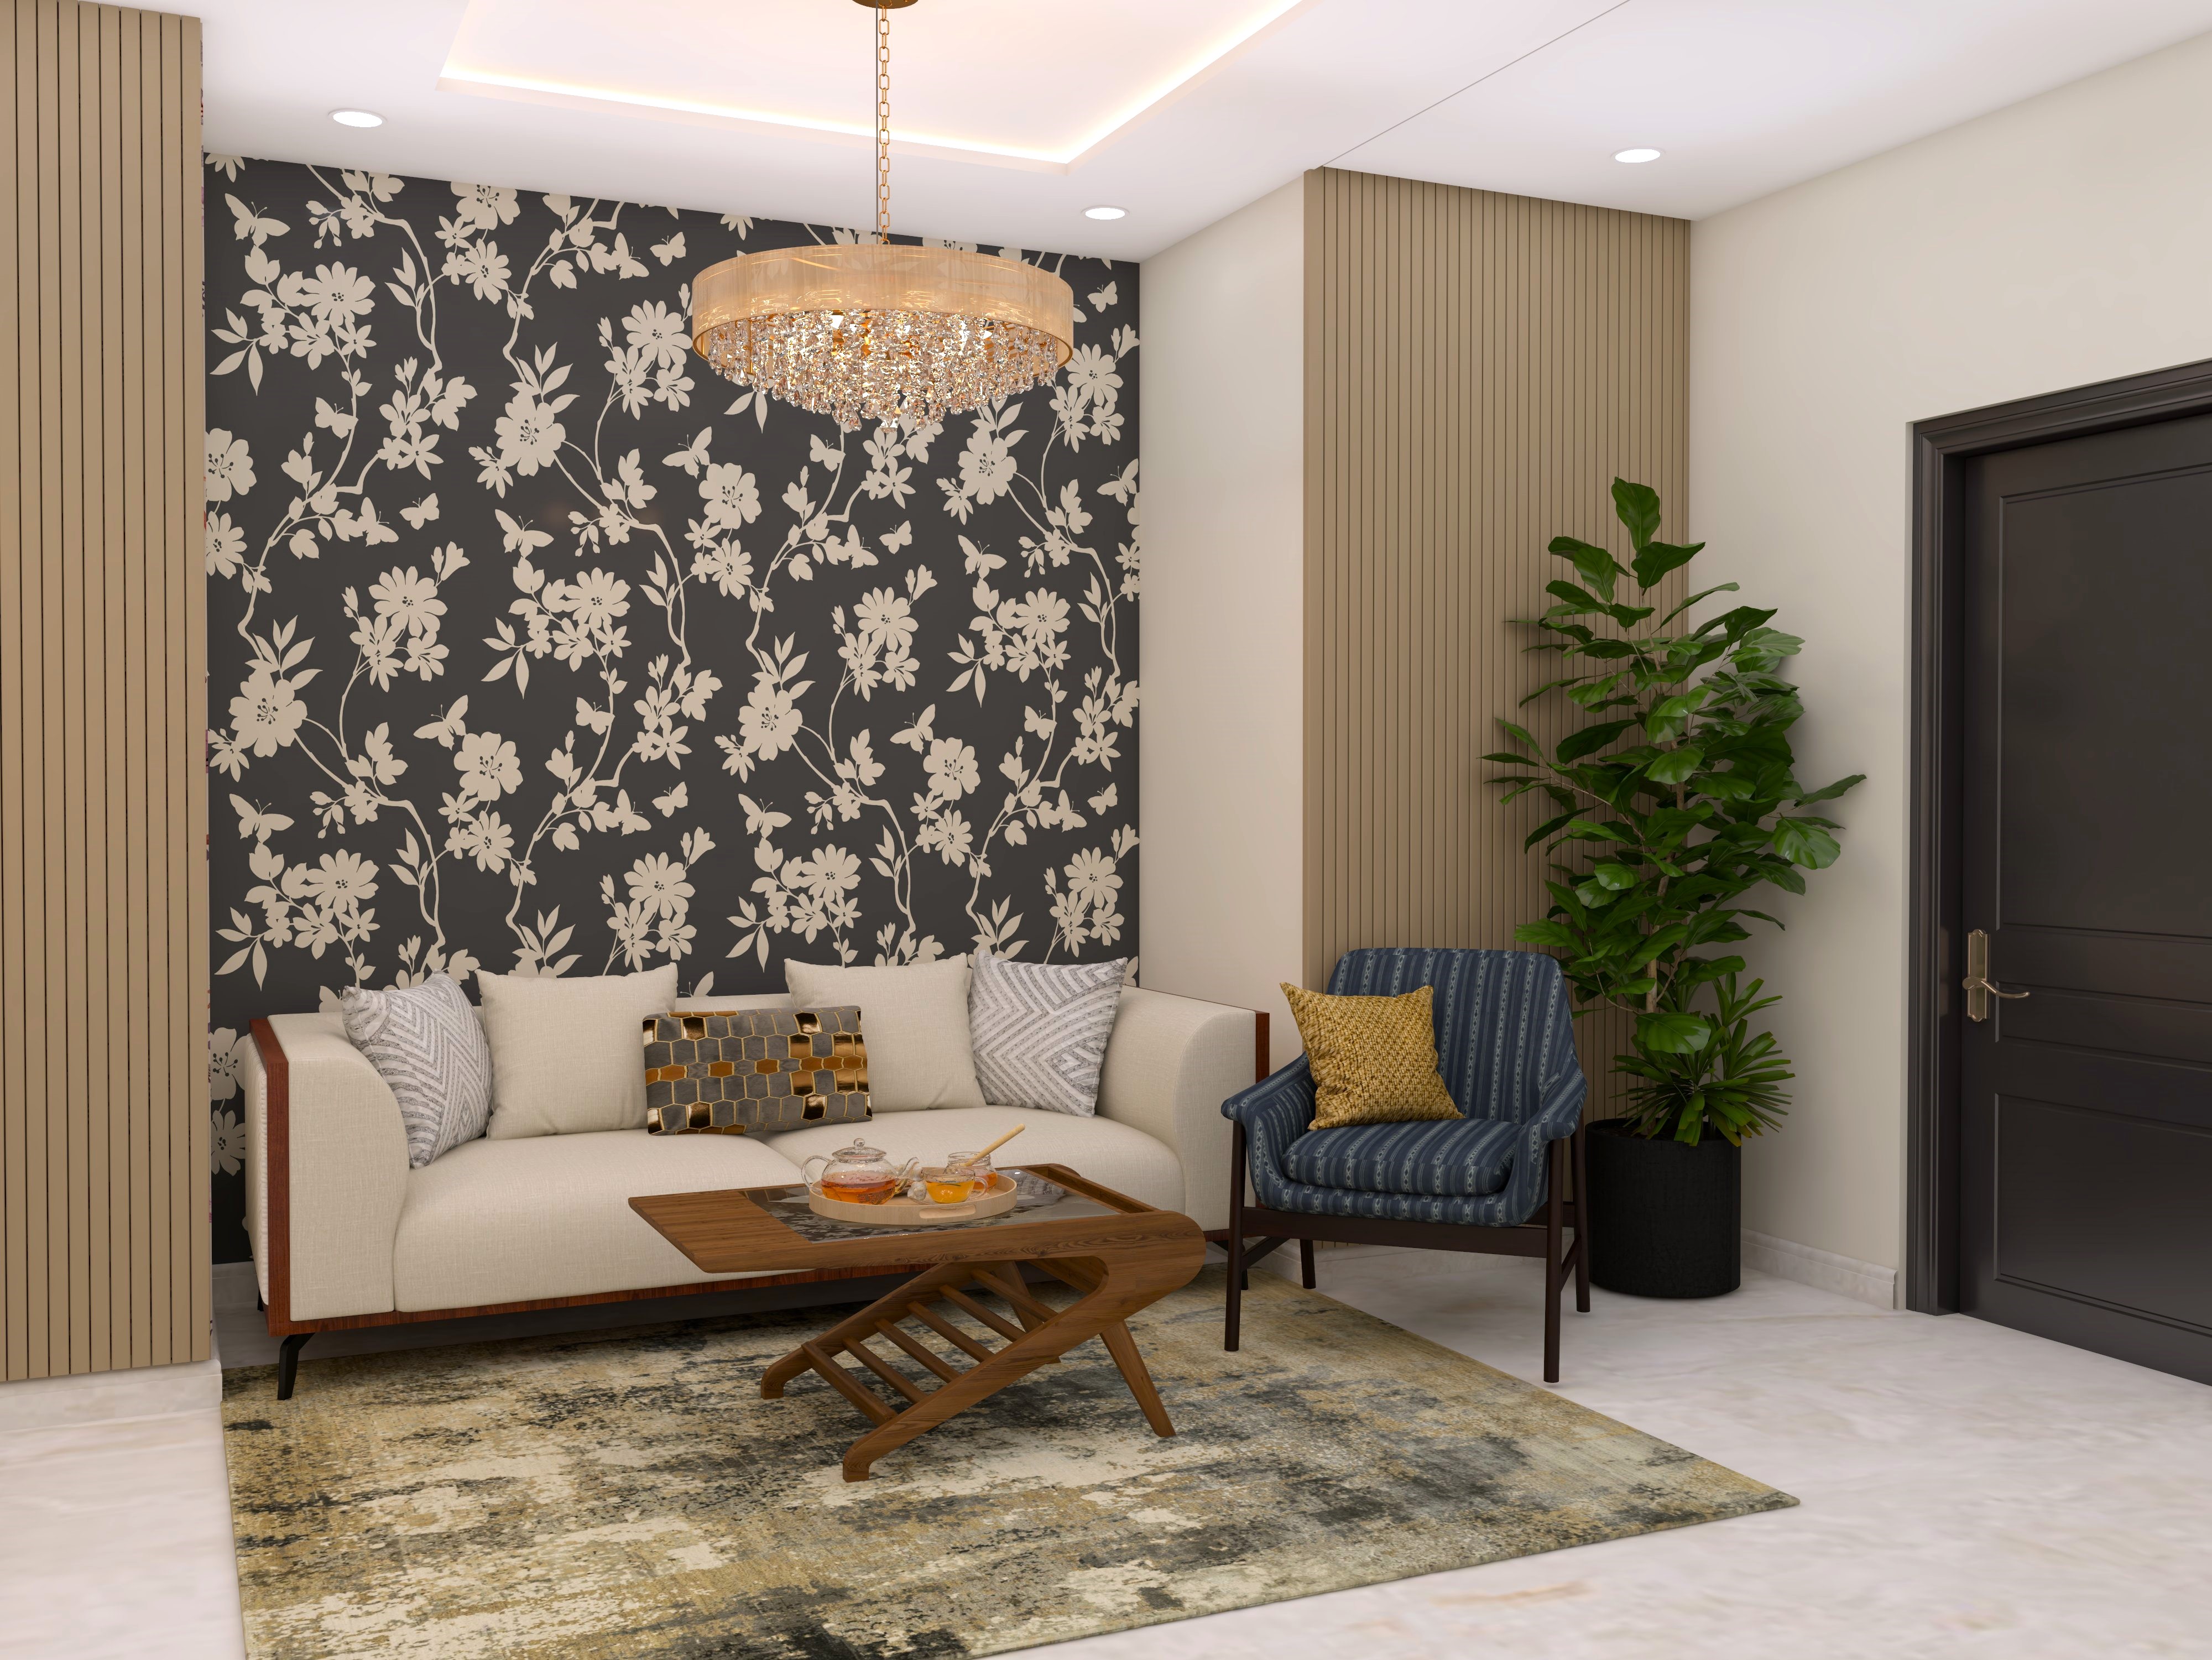 Living room with black floral wallpaper and white accents - Beautiful Homes